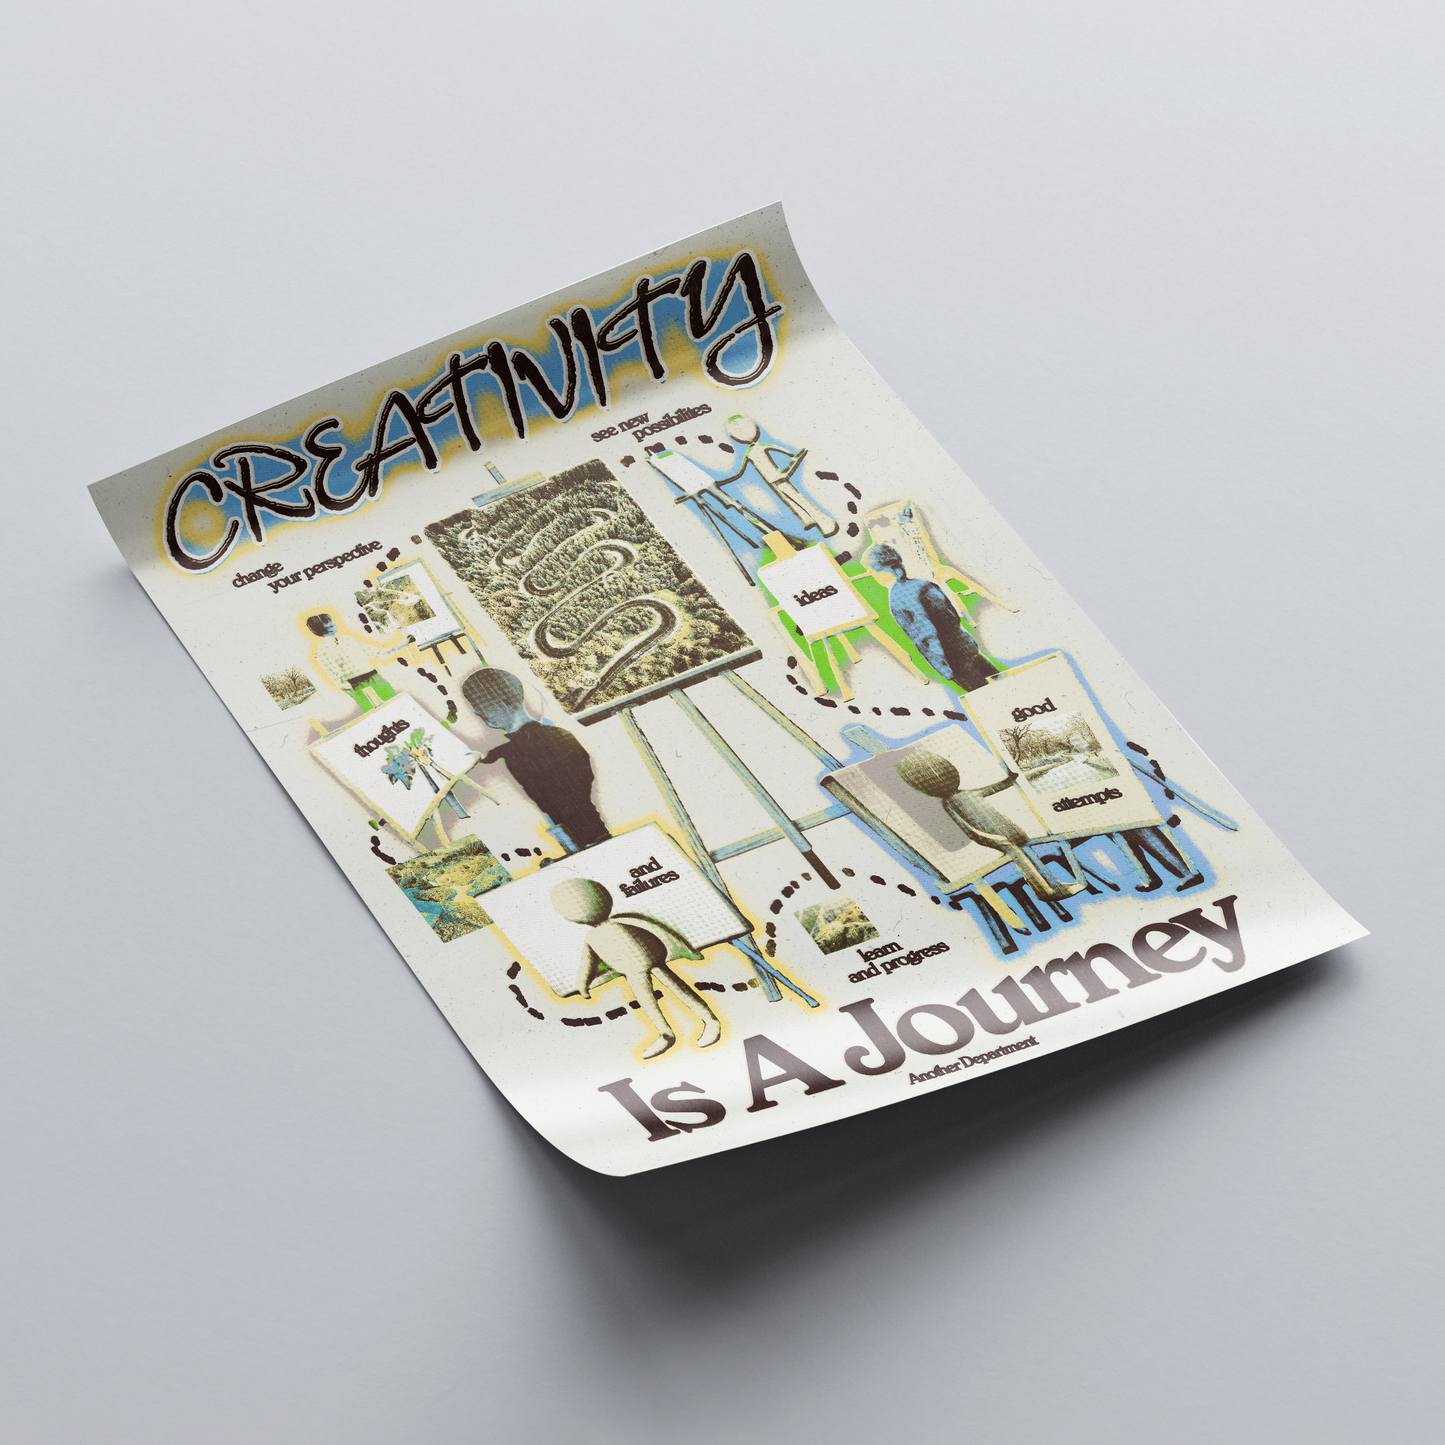 139 - Creativity is a Journey